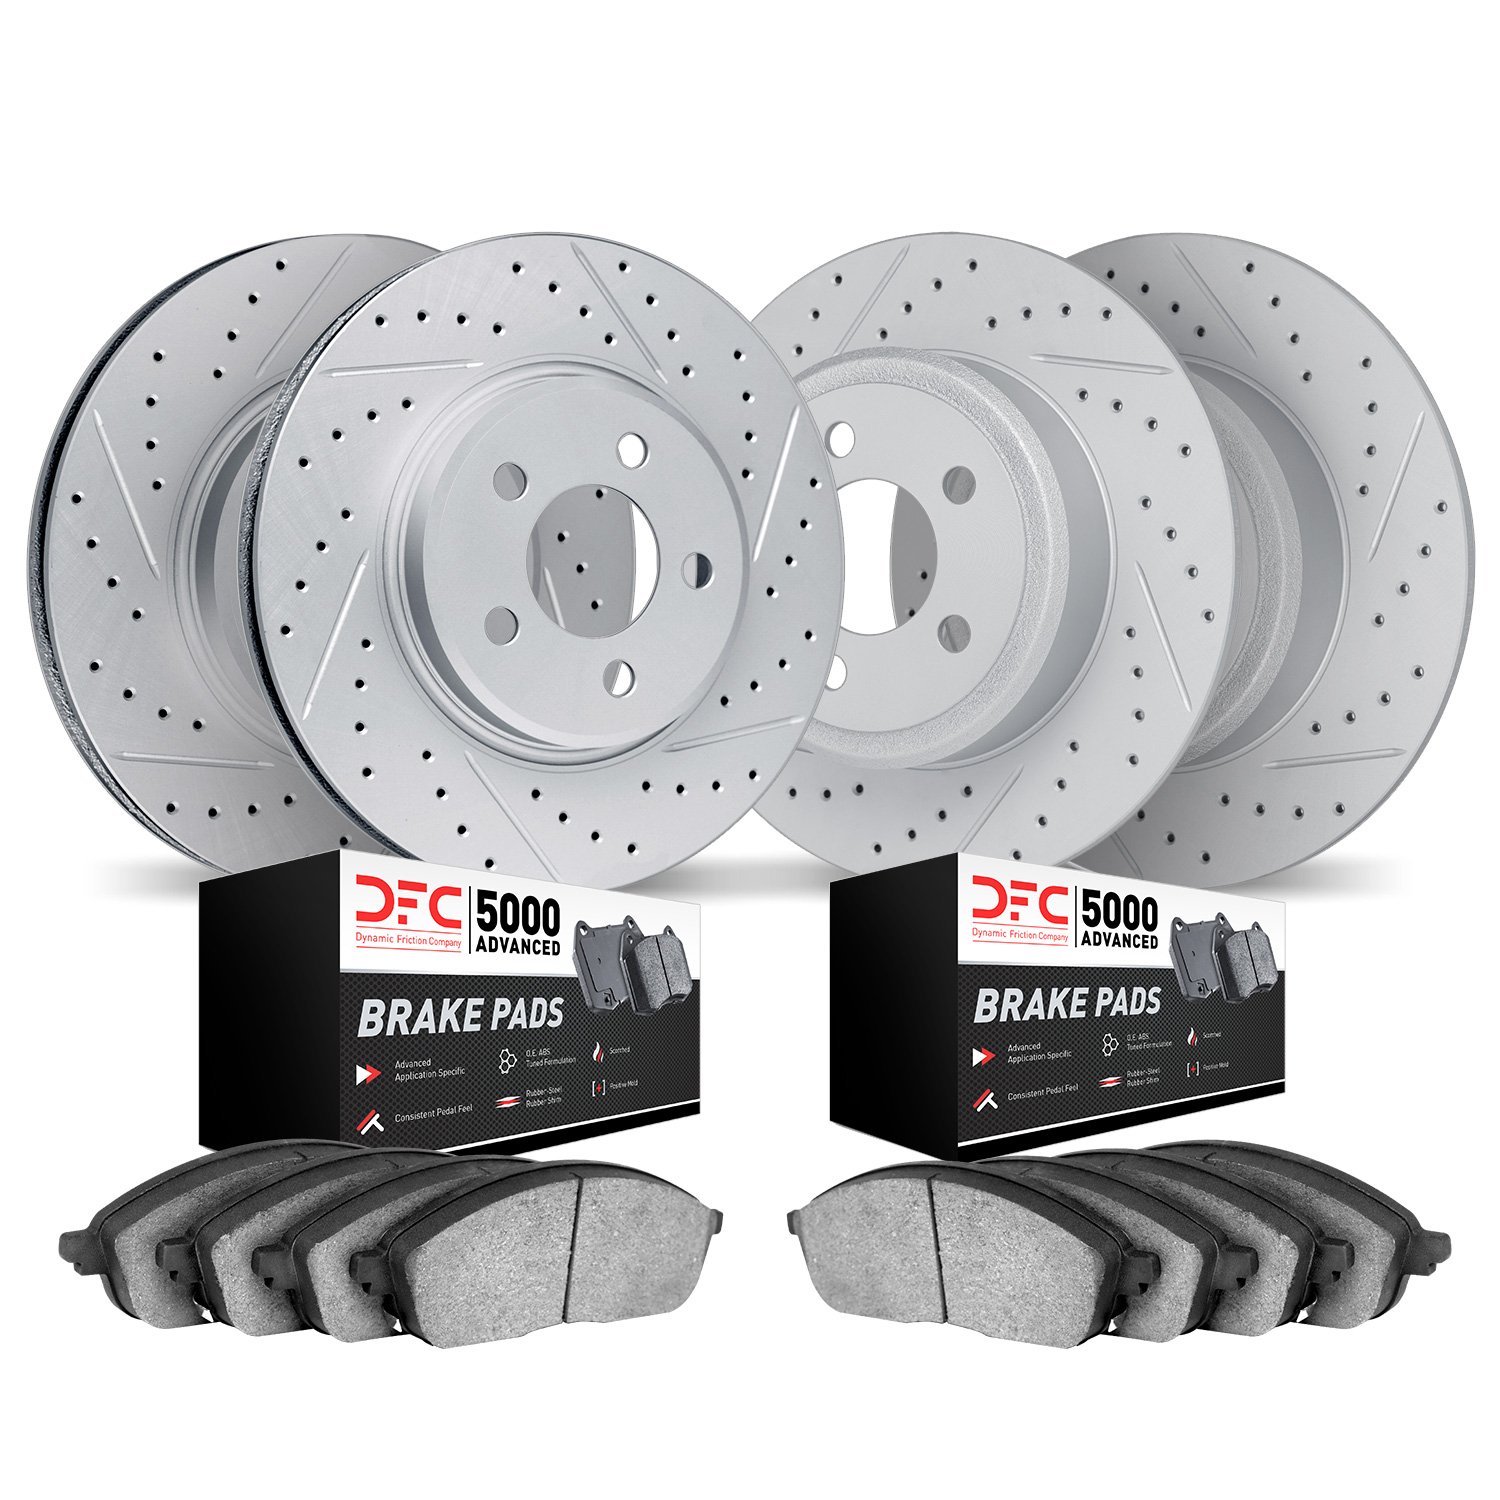 2504-67068 Geoperformance Drilled/Slotted Rotors w/5000 Advanced Brake Pads Kit, Fits Select Infiniti/Nissan, Position: Front an